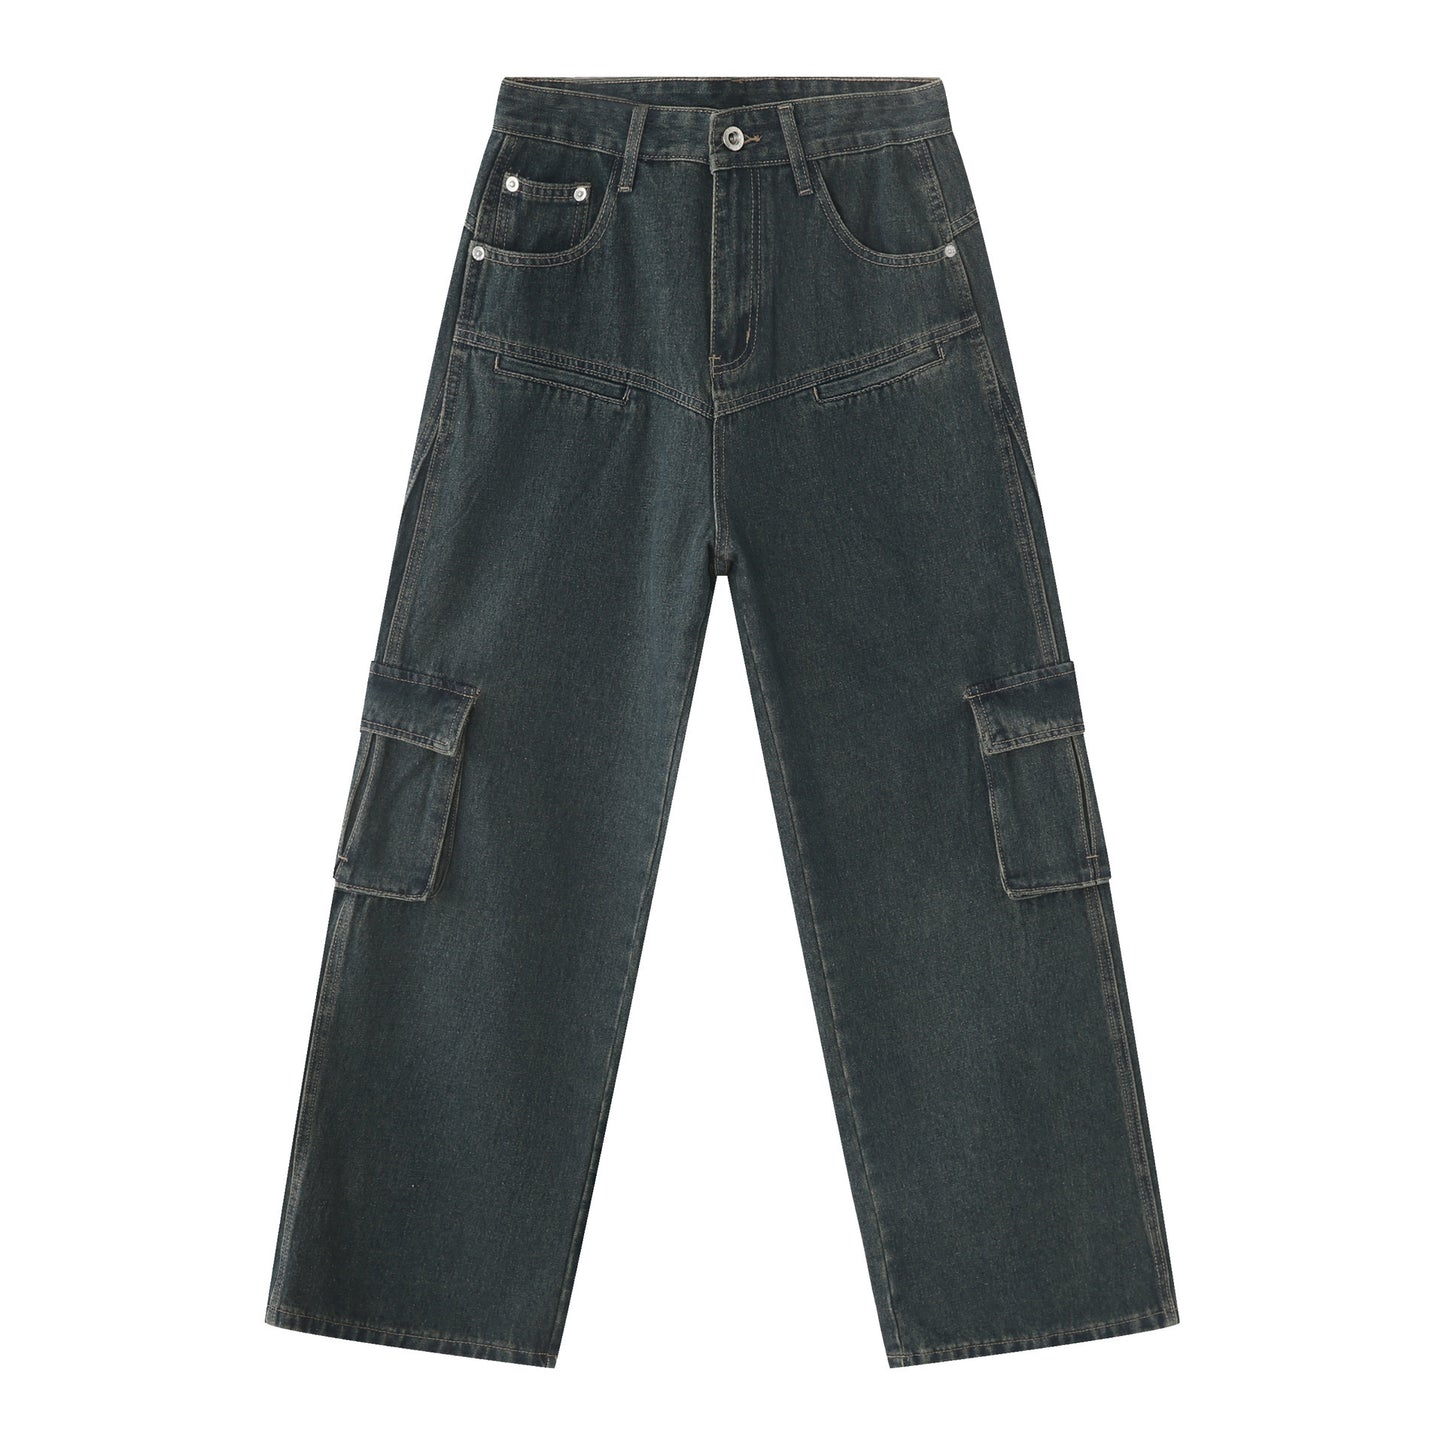 Men's Multi-pocket American Washed Jeans apparel & accessories